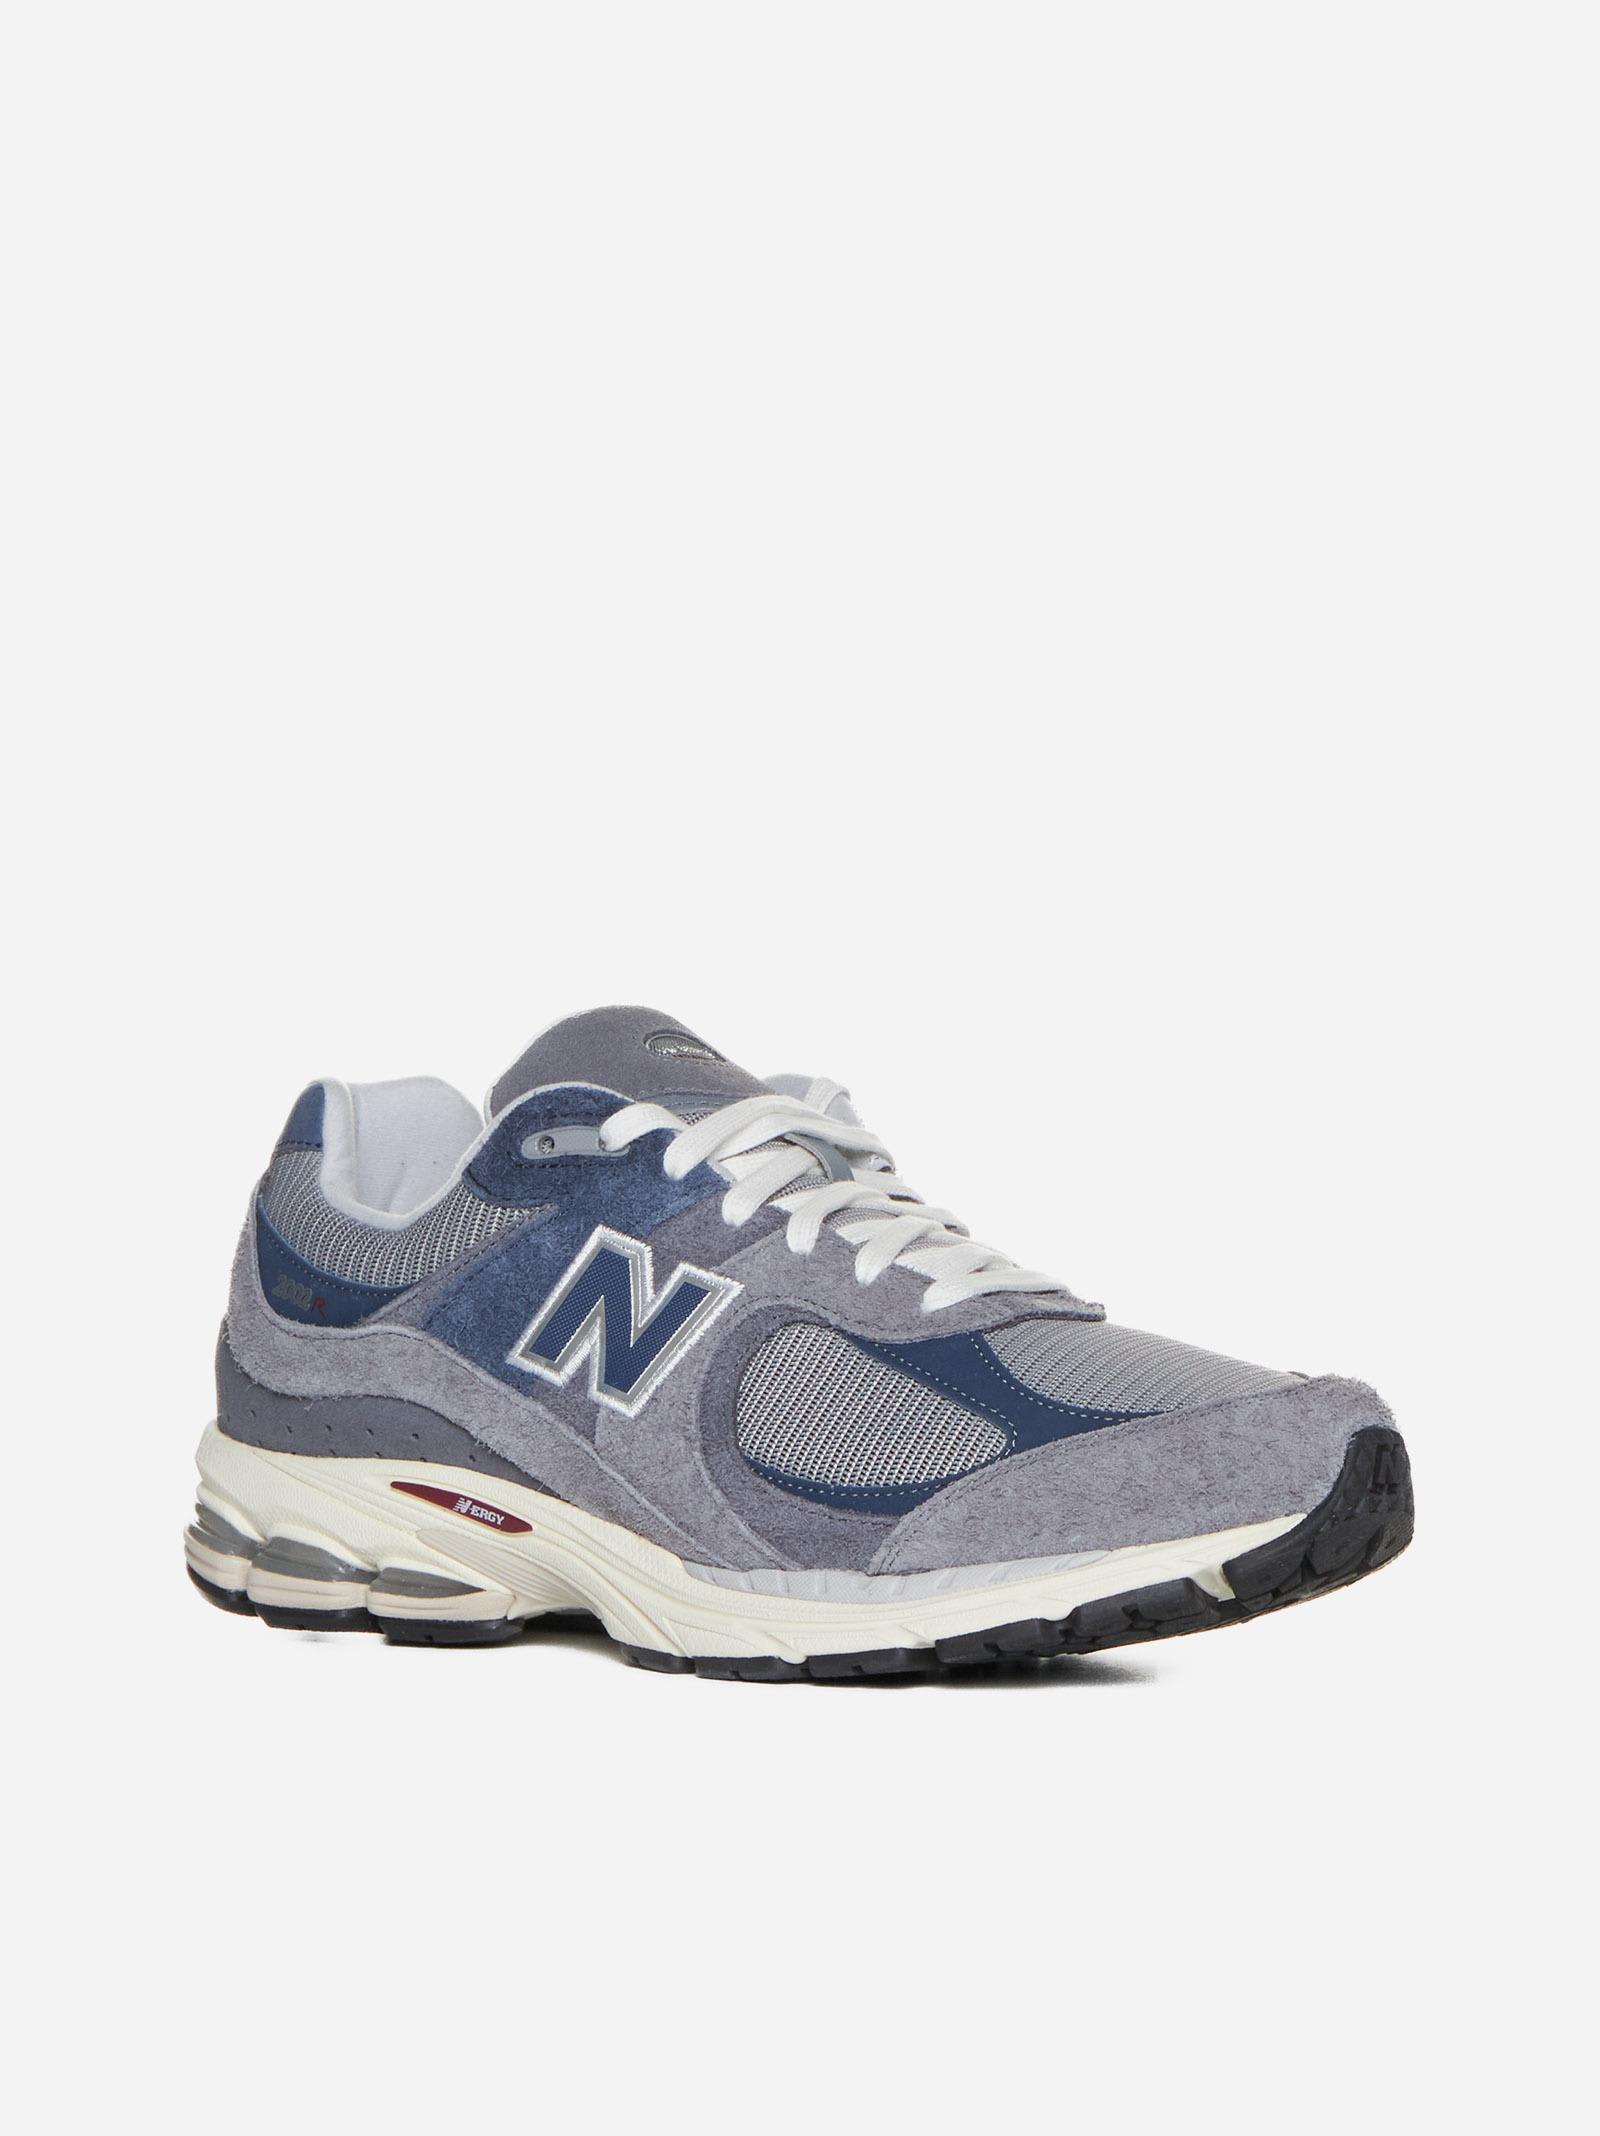 Shop New Balance 2002 Suede, Leather And Mesh Sneakers In Grey/blue